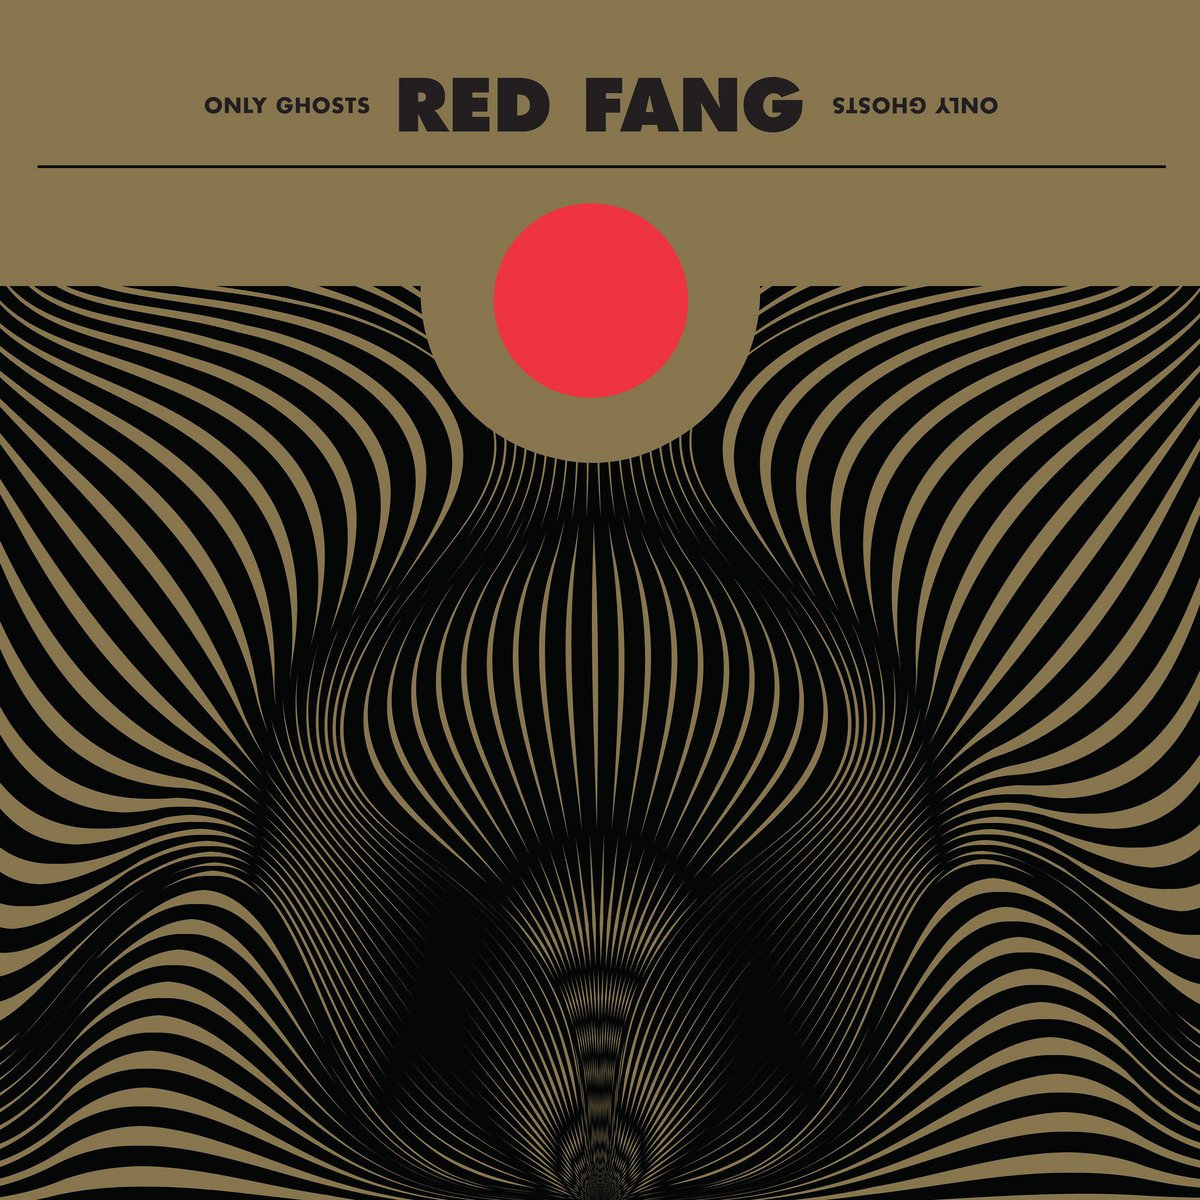 Red Fang - Only Ghosts (2016) FLAC Download